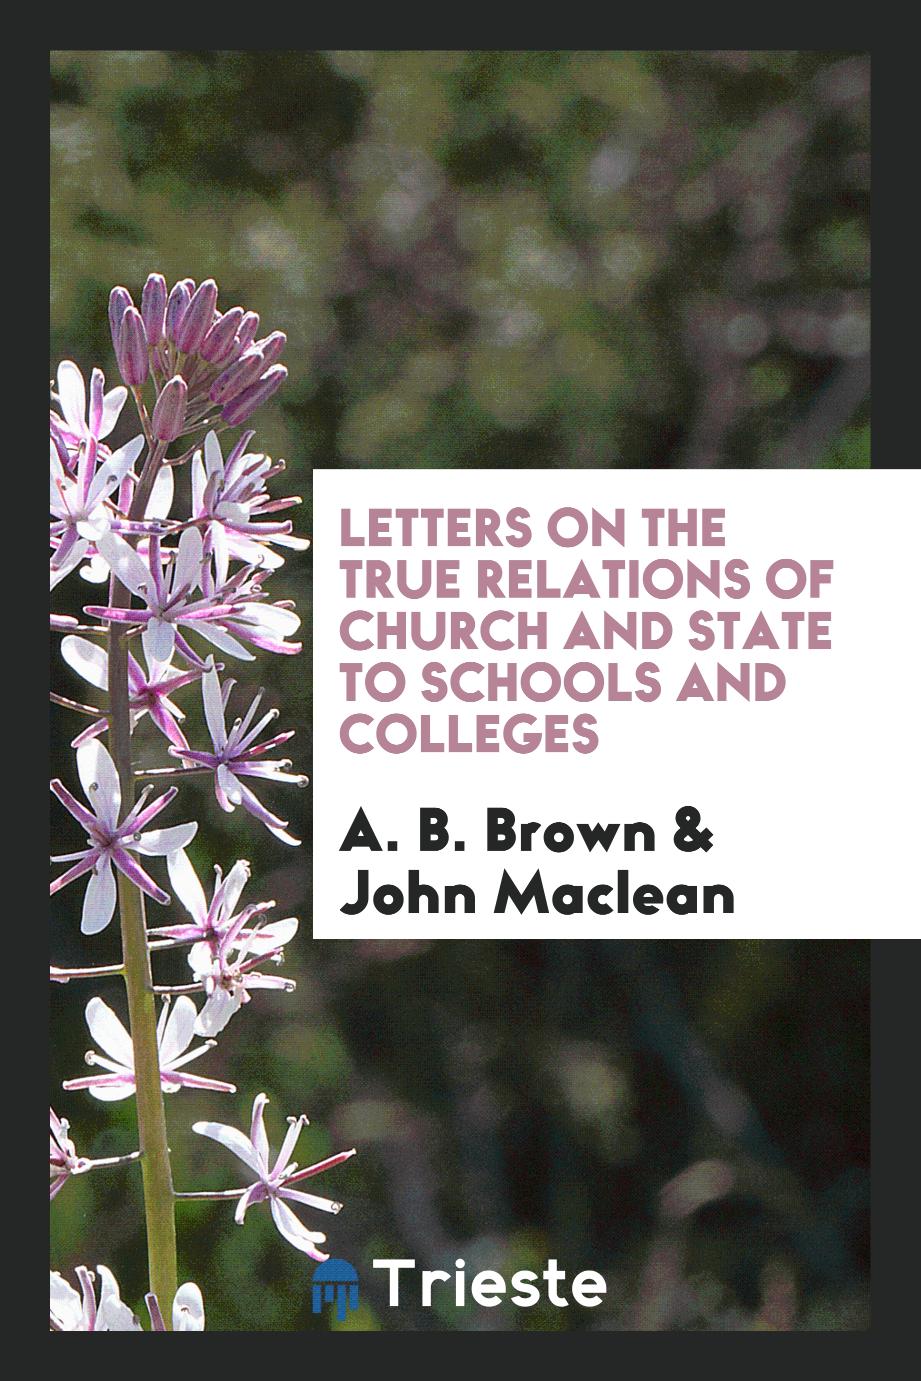 Letters on the true relations of church and state to schools and colleges